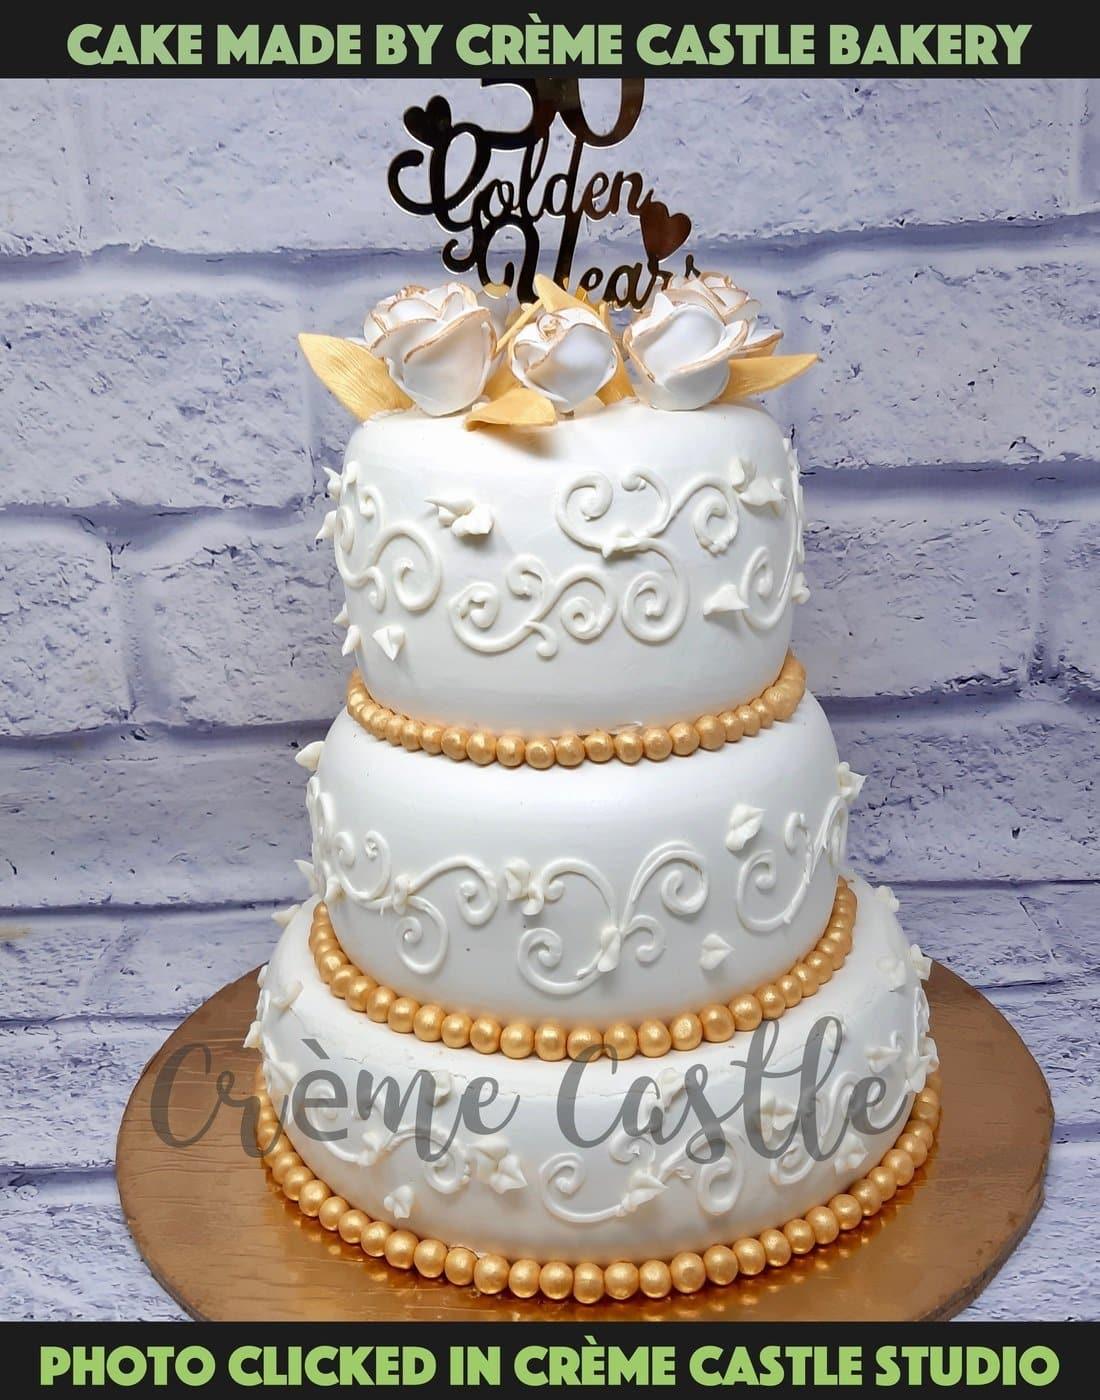 A 3 layer cake with elegant fondant design made for grand ceremonies. A full fondant made with artistic precision